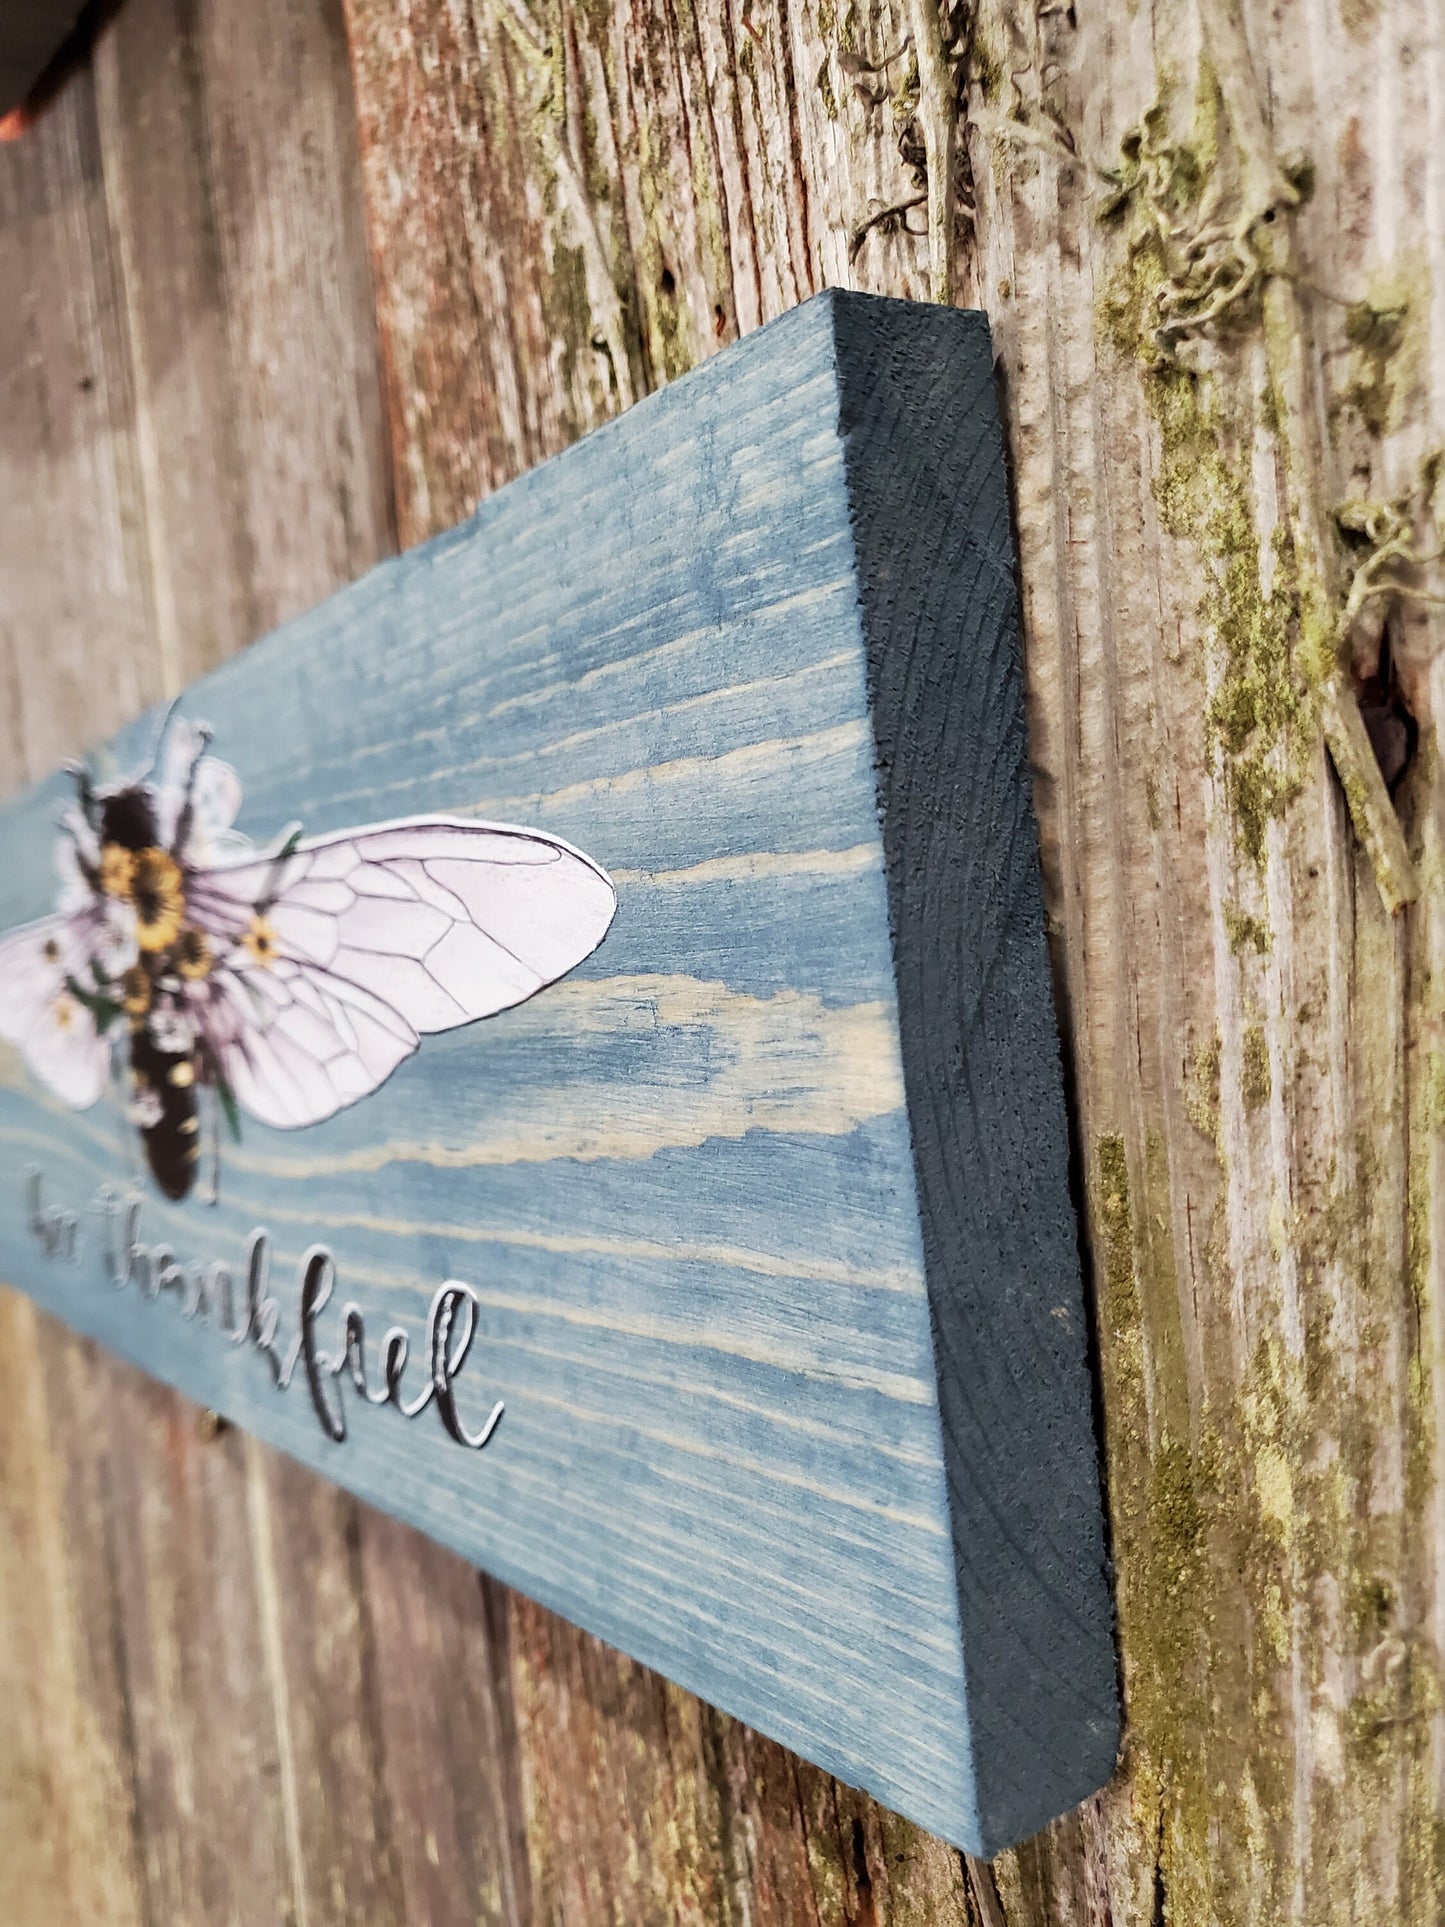 Bee Thankful Wall Sign Floral Flowers Be Thankful Bubble Bee Plaque Garden Thanksgiving Decor Wall Art Color Wood Print